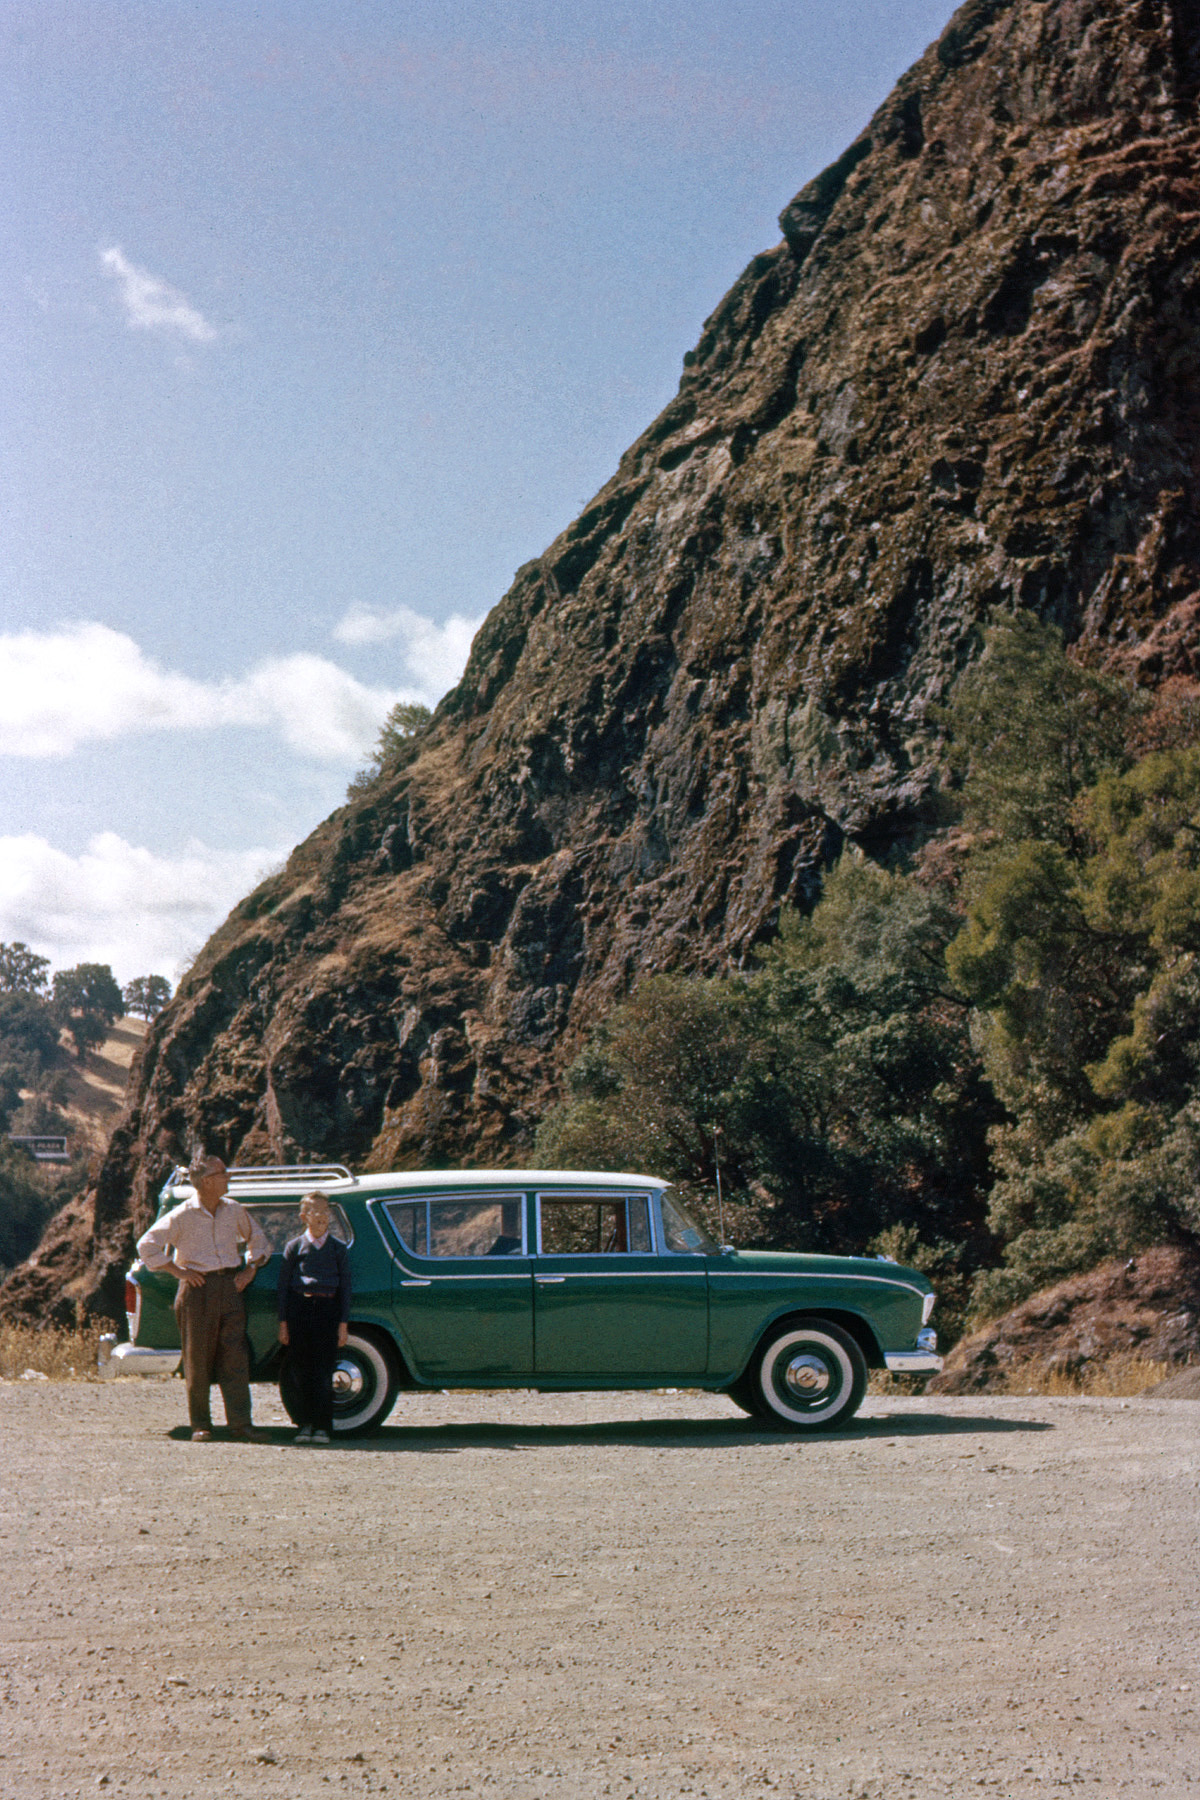 September 1956. My father, me and the new Rambler on its first long ride, at Squaw Rock on U.S. 101 south of Ukiah, California, captured by my brother on Ektachrome. Could almost be a new card ad, except I'm not running around laughing hysterically. View full size.